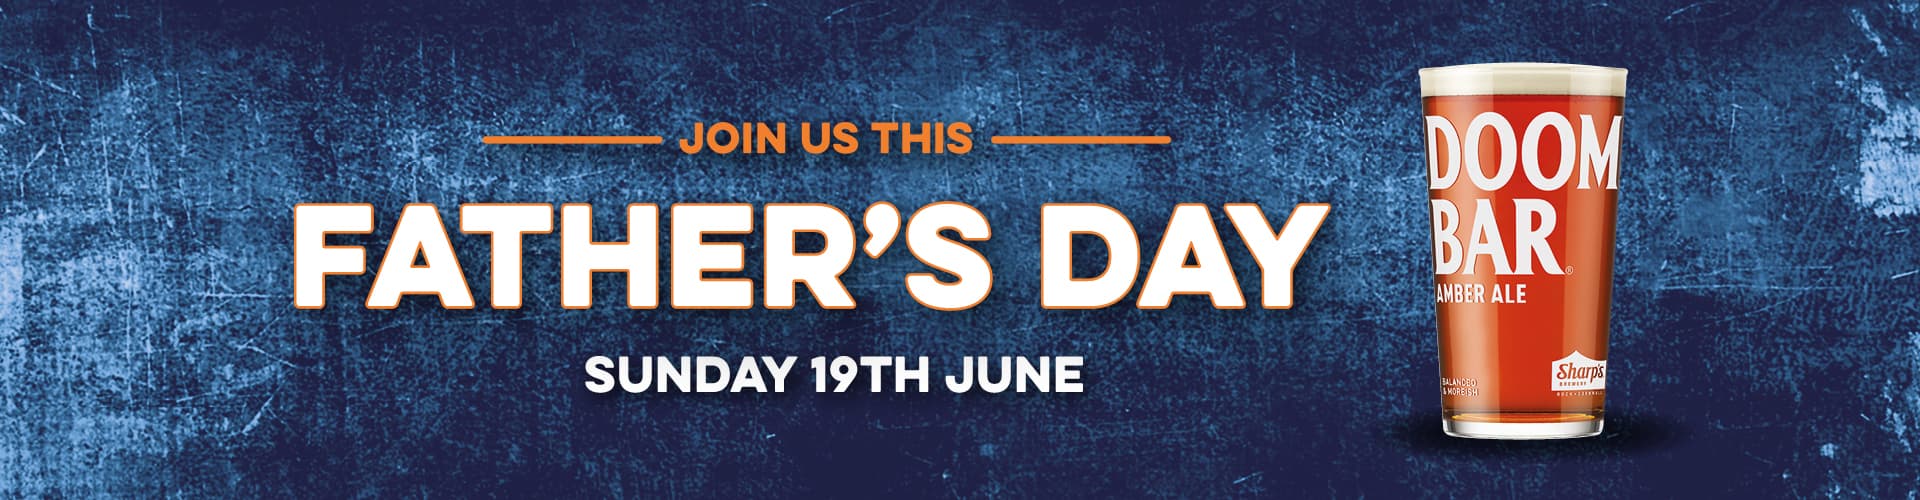 Father's Day at The Saltshouse pub in Hull